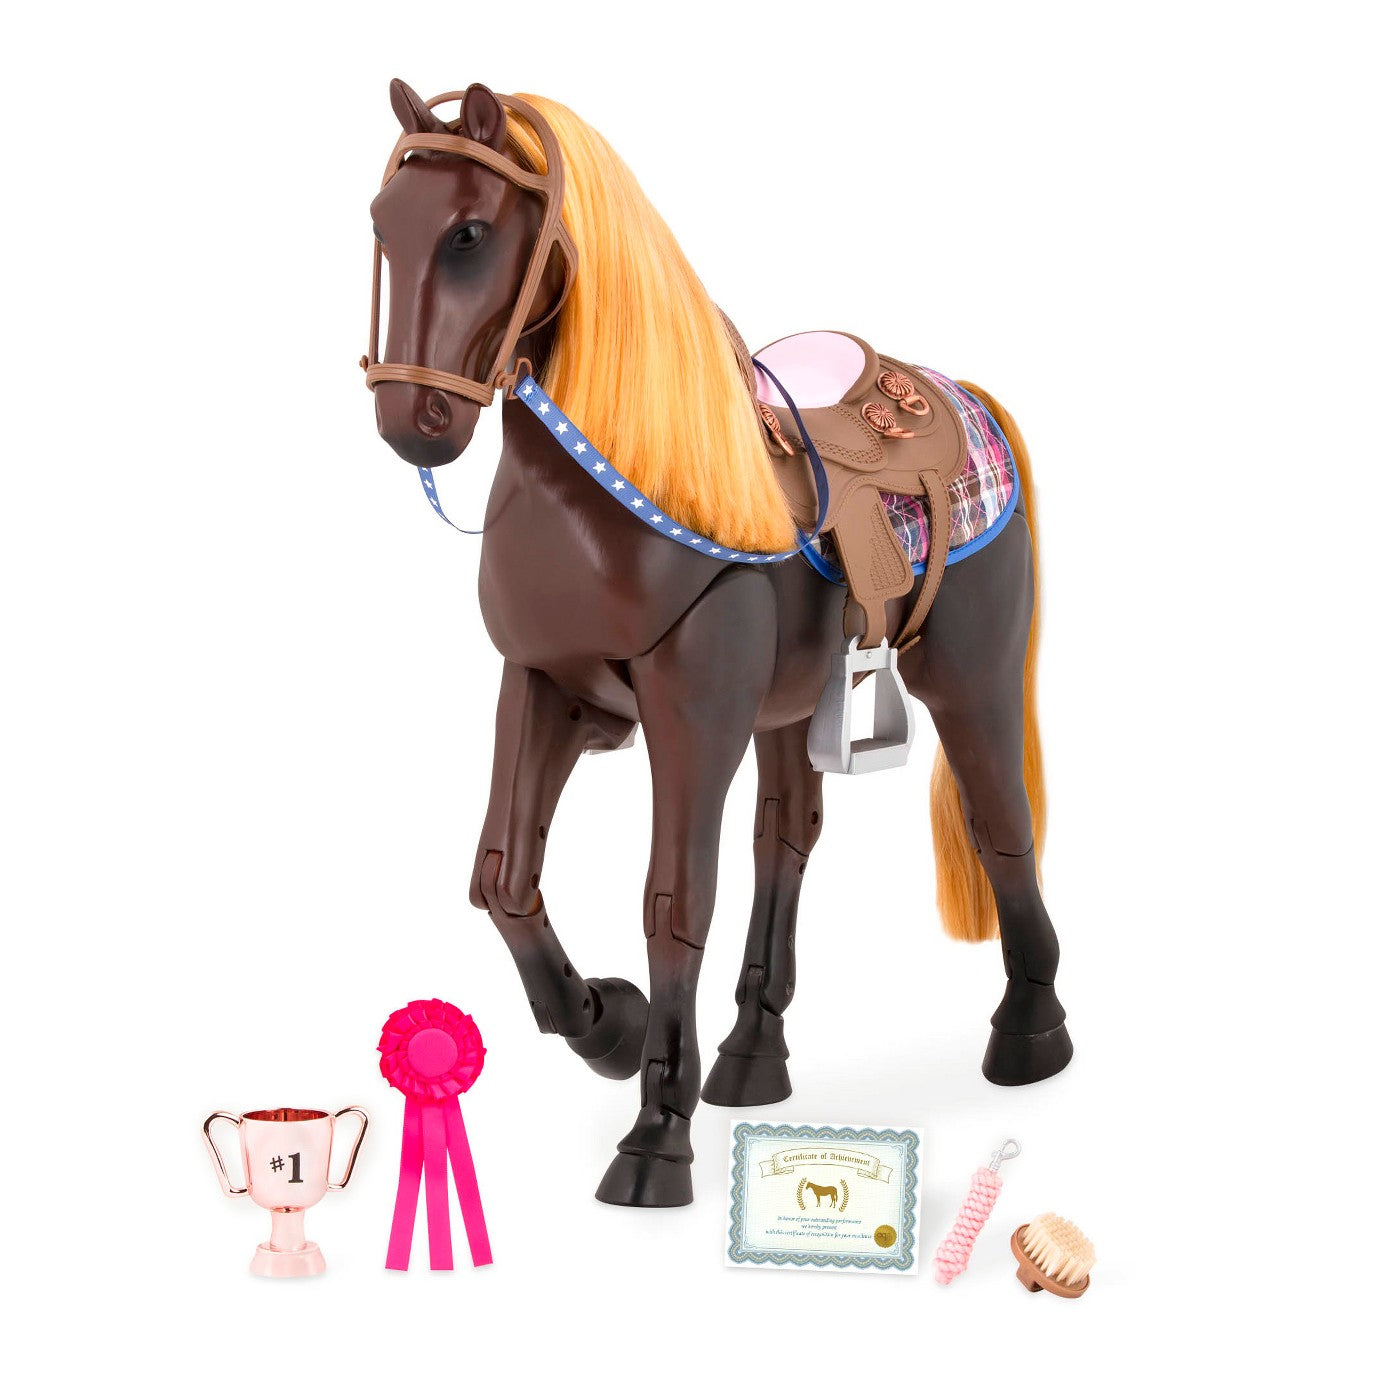 OG Horse Thoroughbred Posable - The Toy Wagon